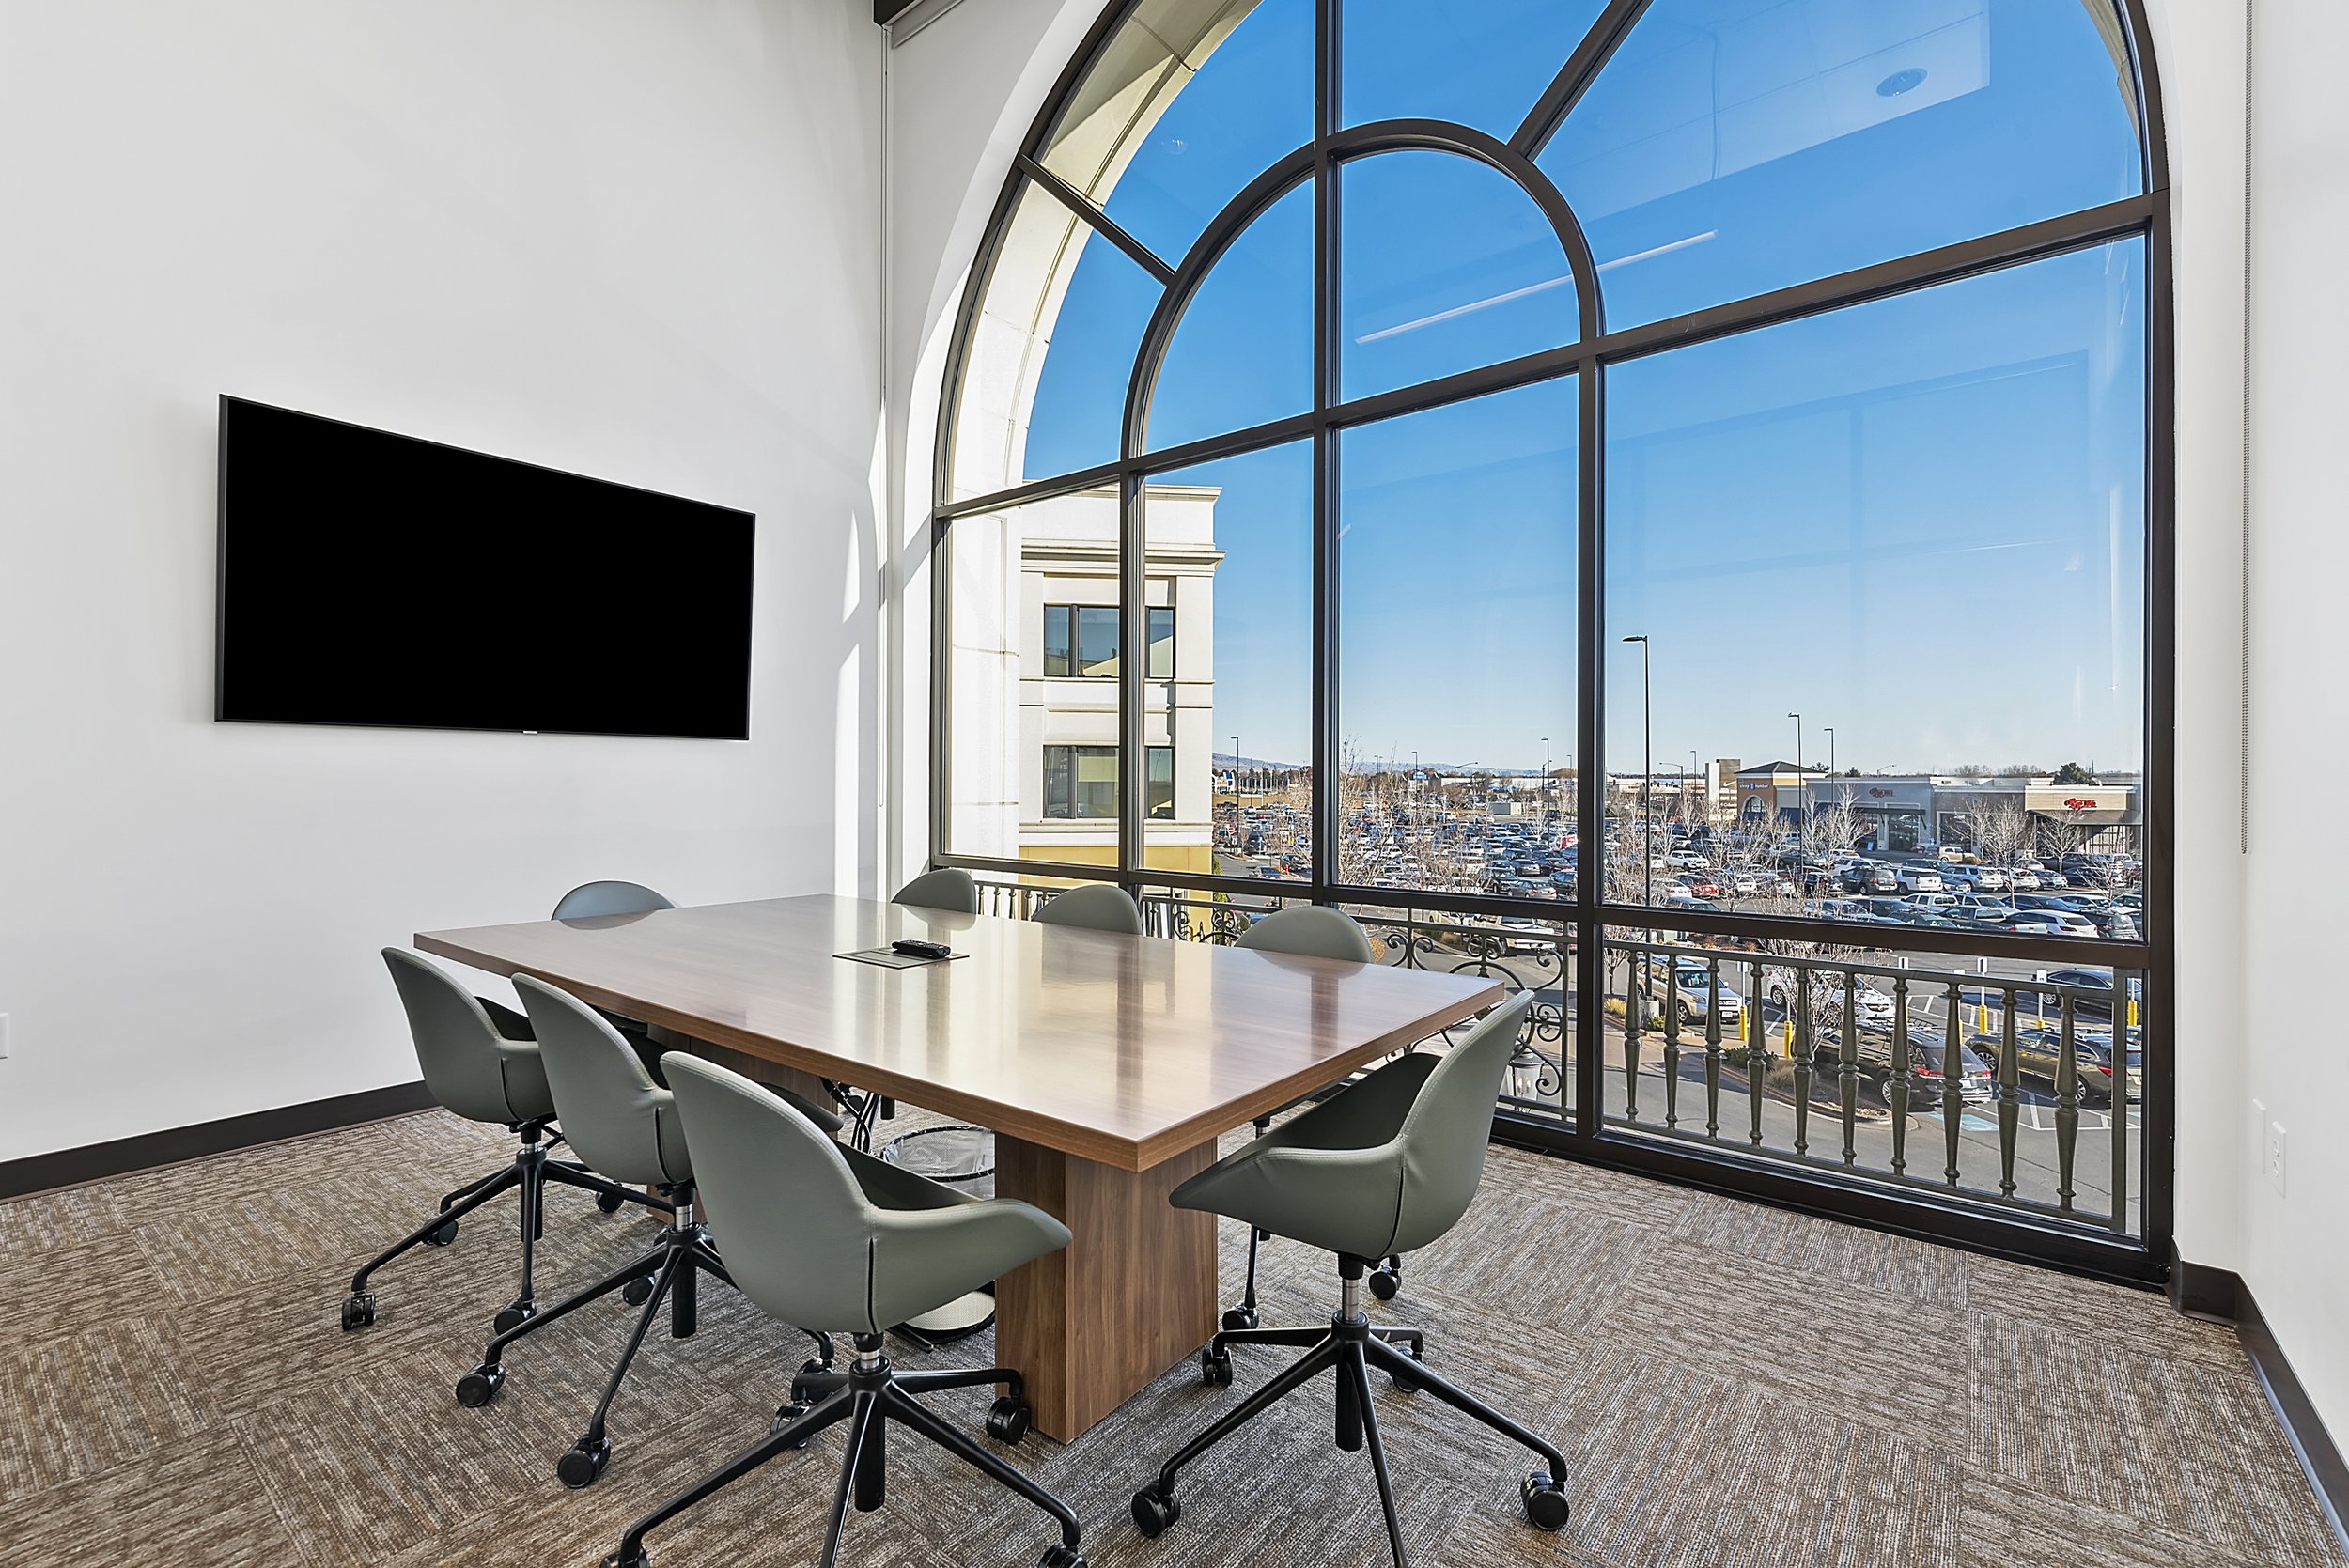 14-Meeting room with view.jpg